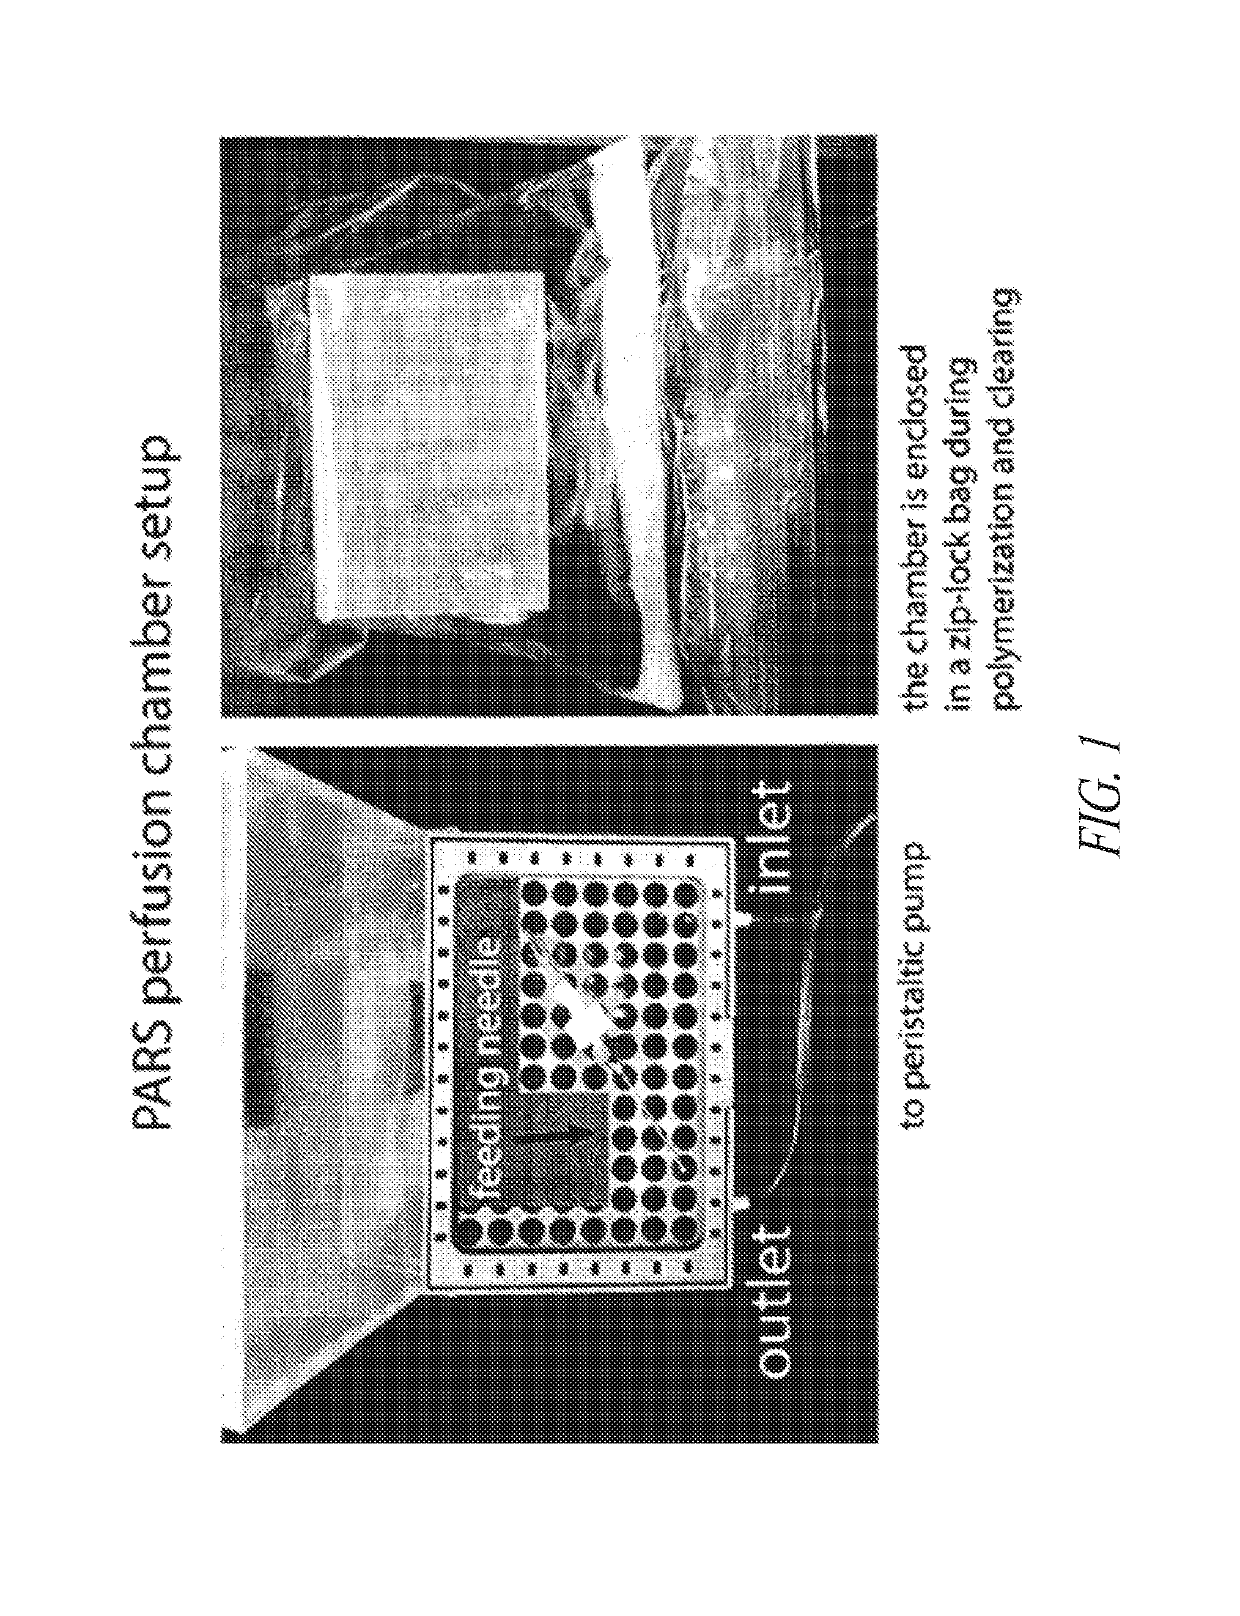 Methods for preparing and analyzing tumor tissue samples for detection and monitoring of cancers